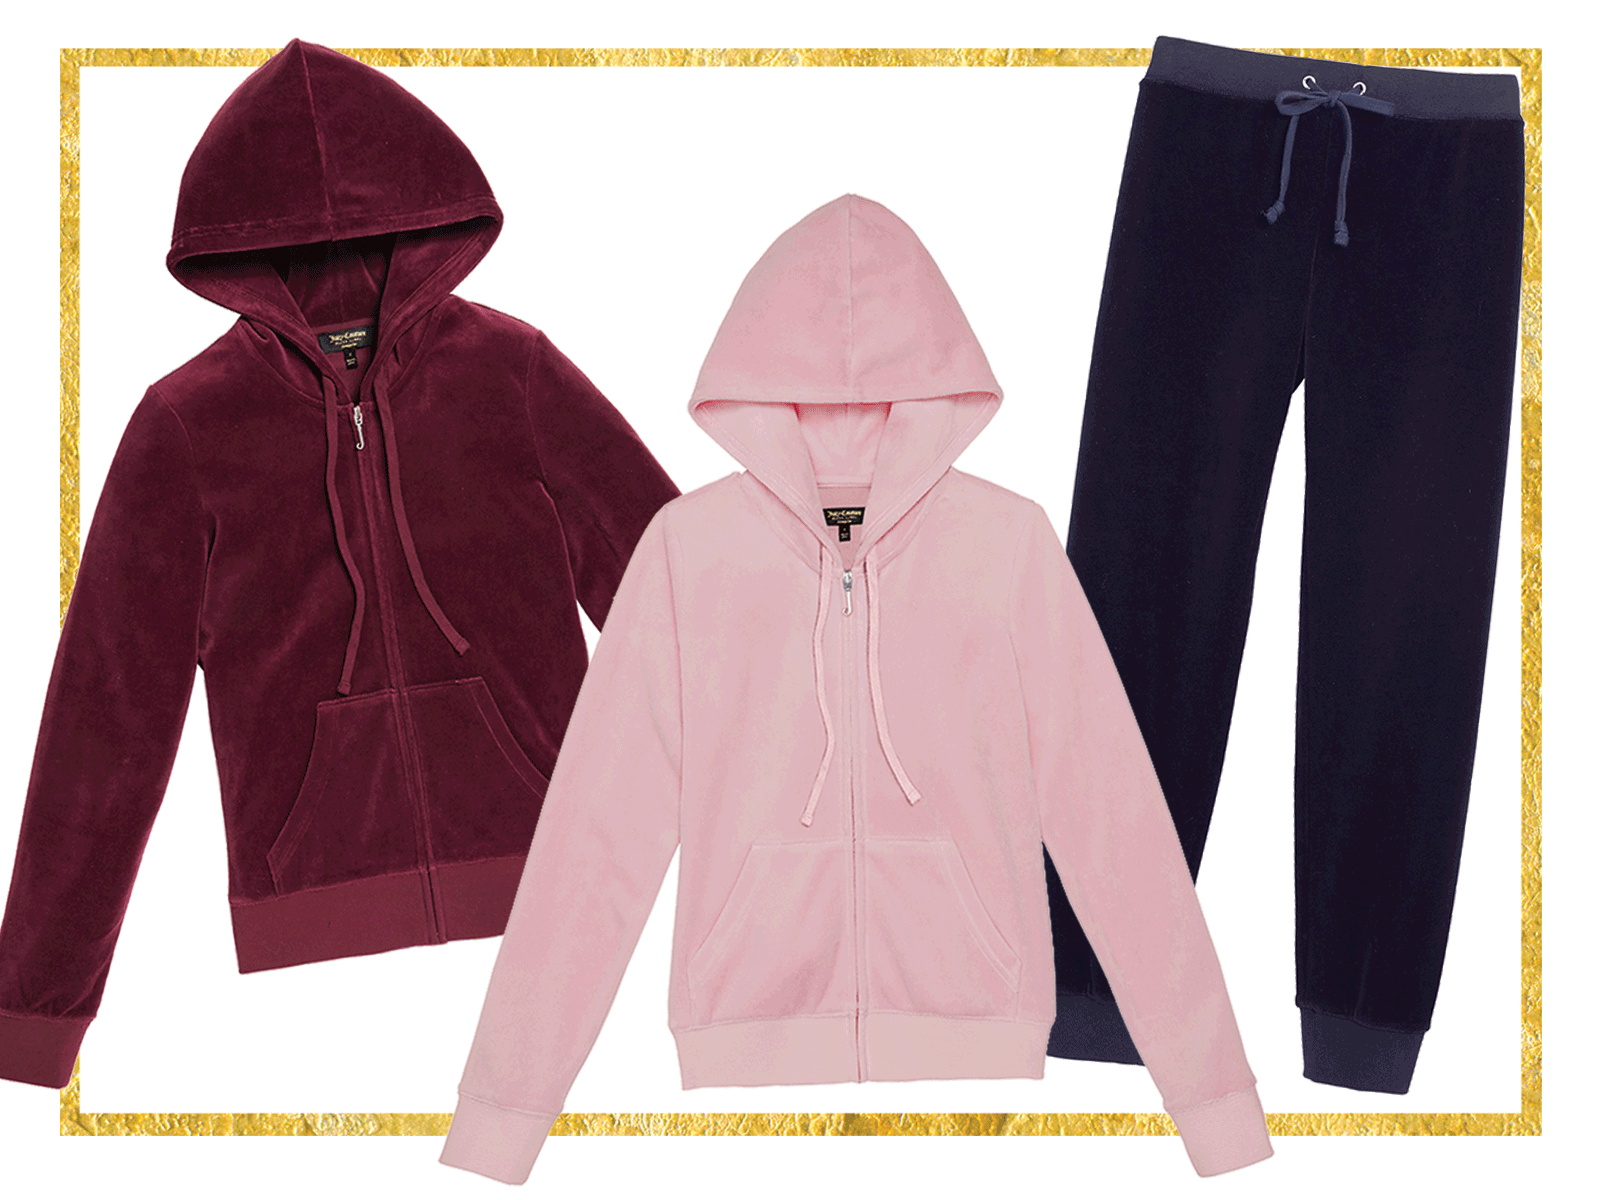 Juicy Couture Velour Tracksuits Are Making a Comeback – Juicy Couture  Capsule Collection at Bloomingdale's